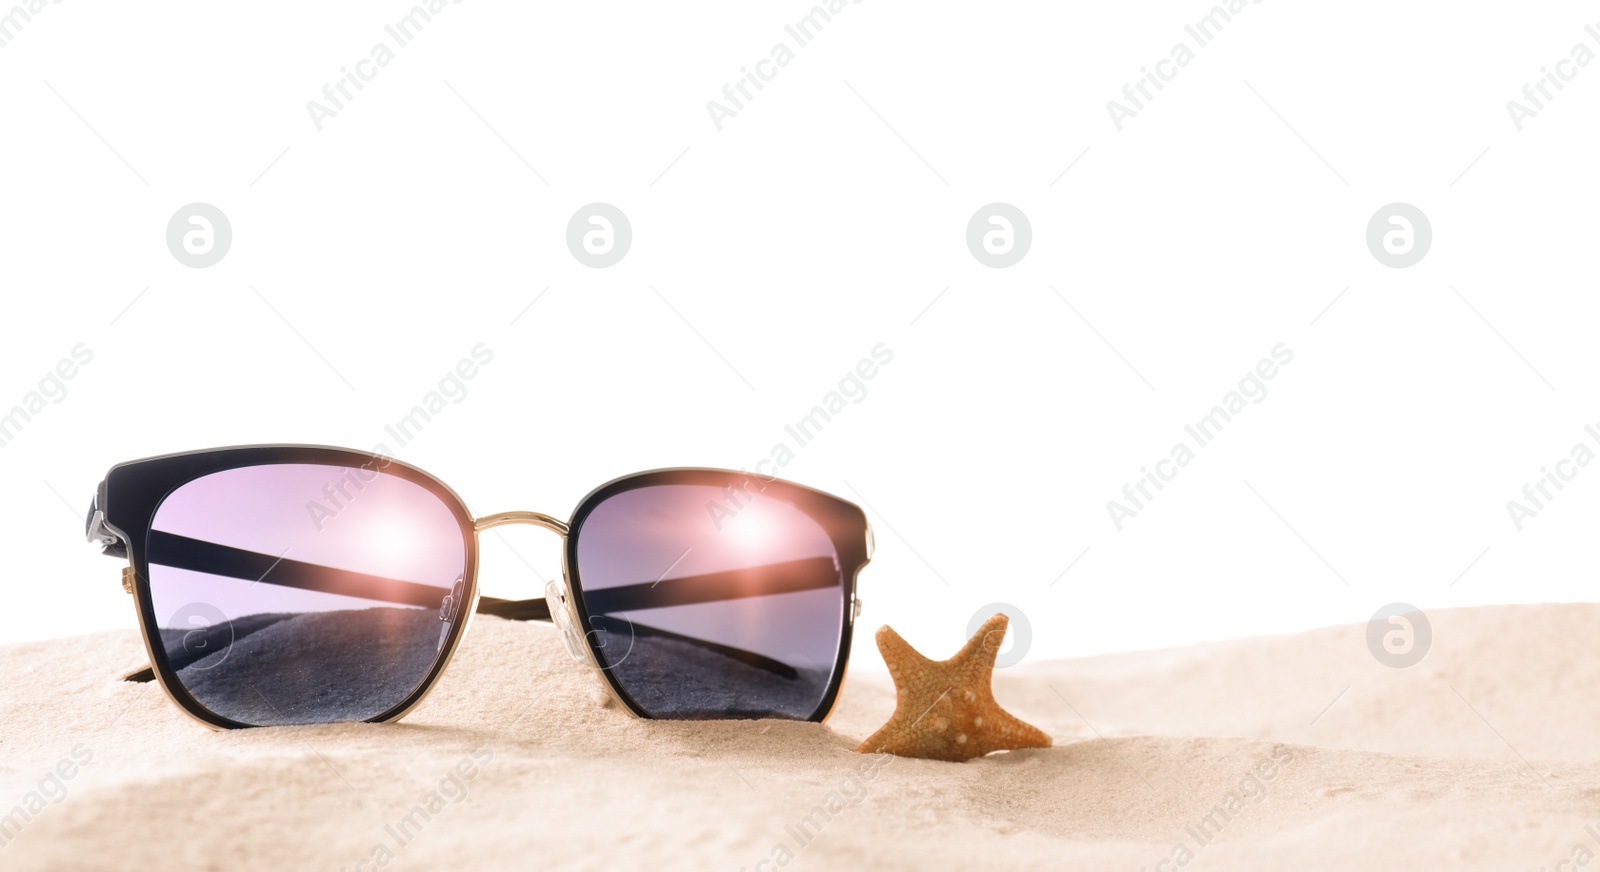 Photo of Stylish sunglasses and starfish on sand against white background. Space for text